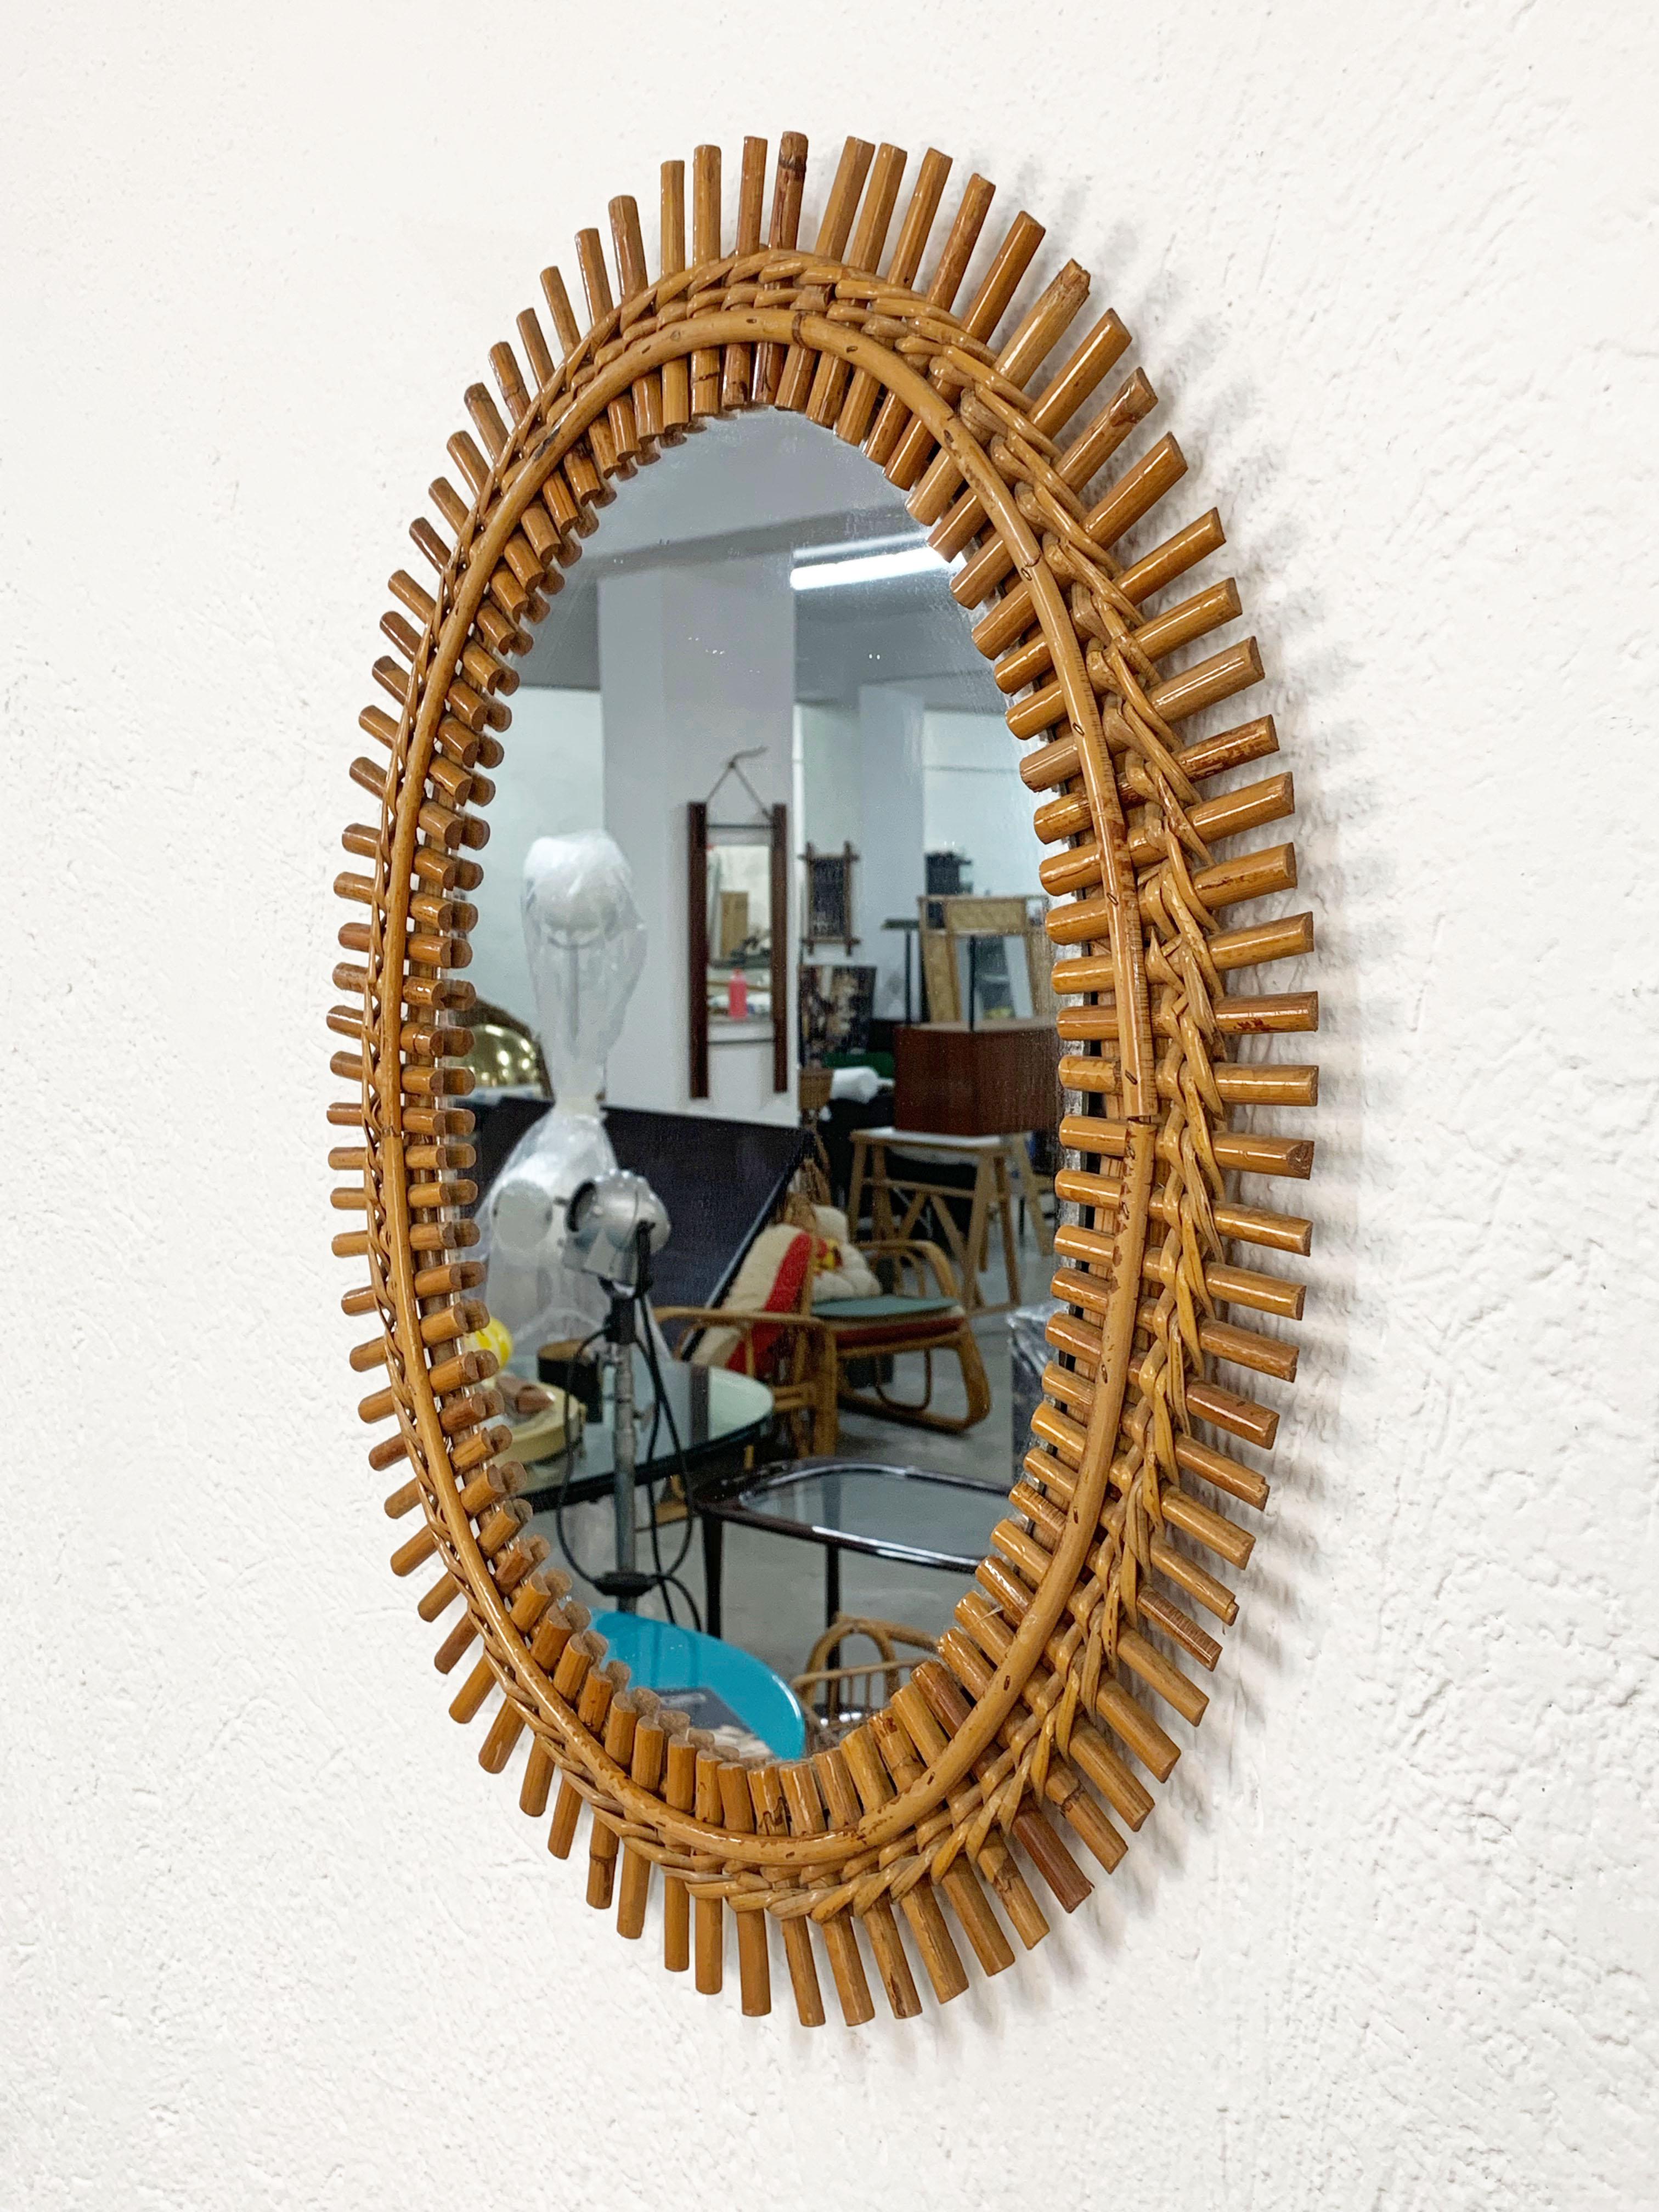 Mid-Century Modern French Riviera Oval Wall Mirror in Bamboo and Rattan, 1960s Midcentury